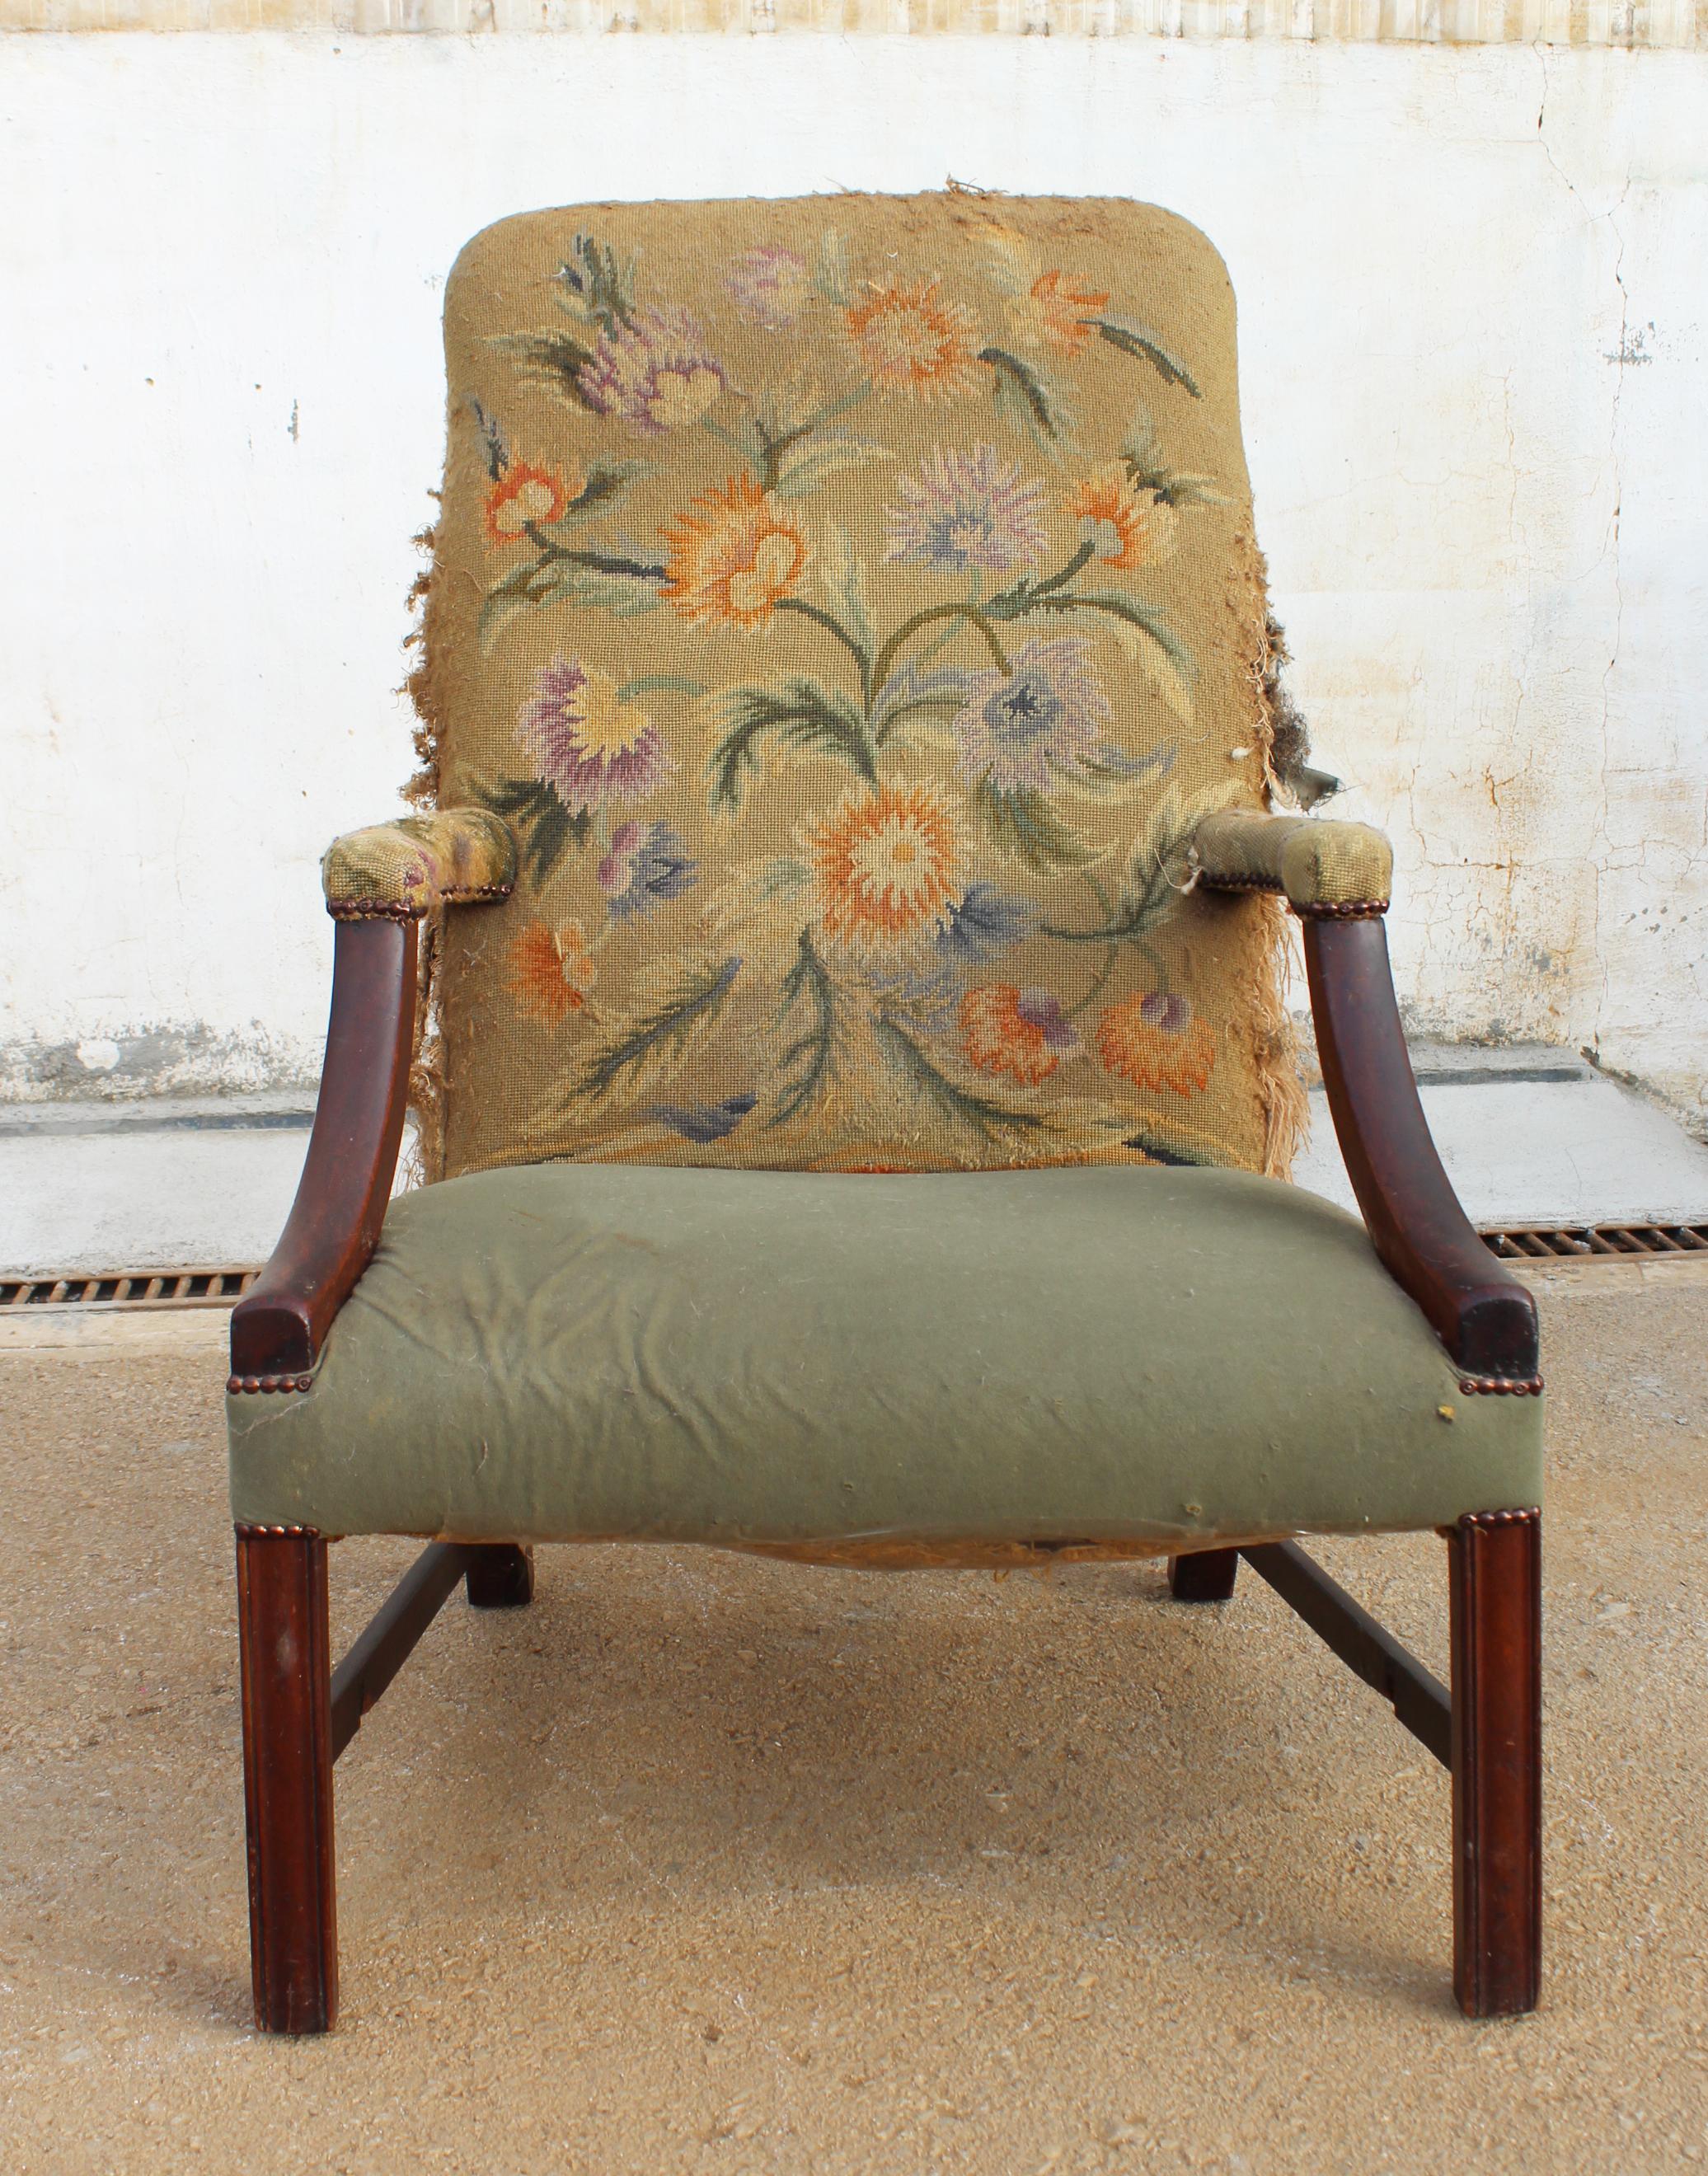 19th century English mahogany armchair with upholstery that needs repair.
  